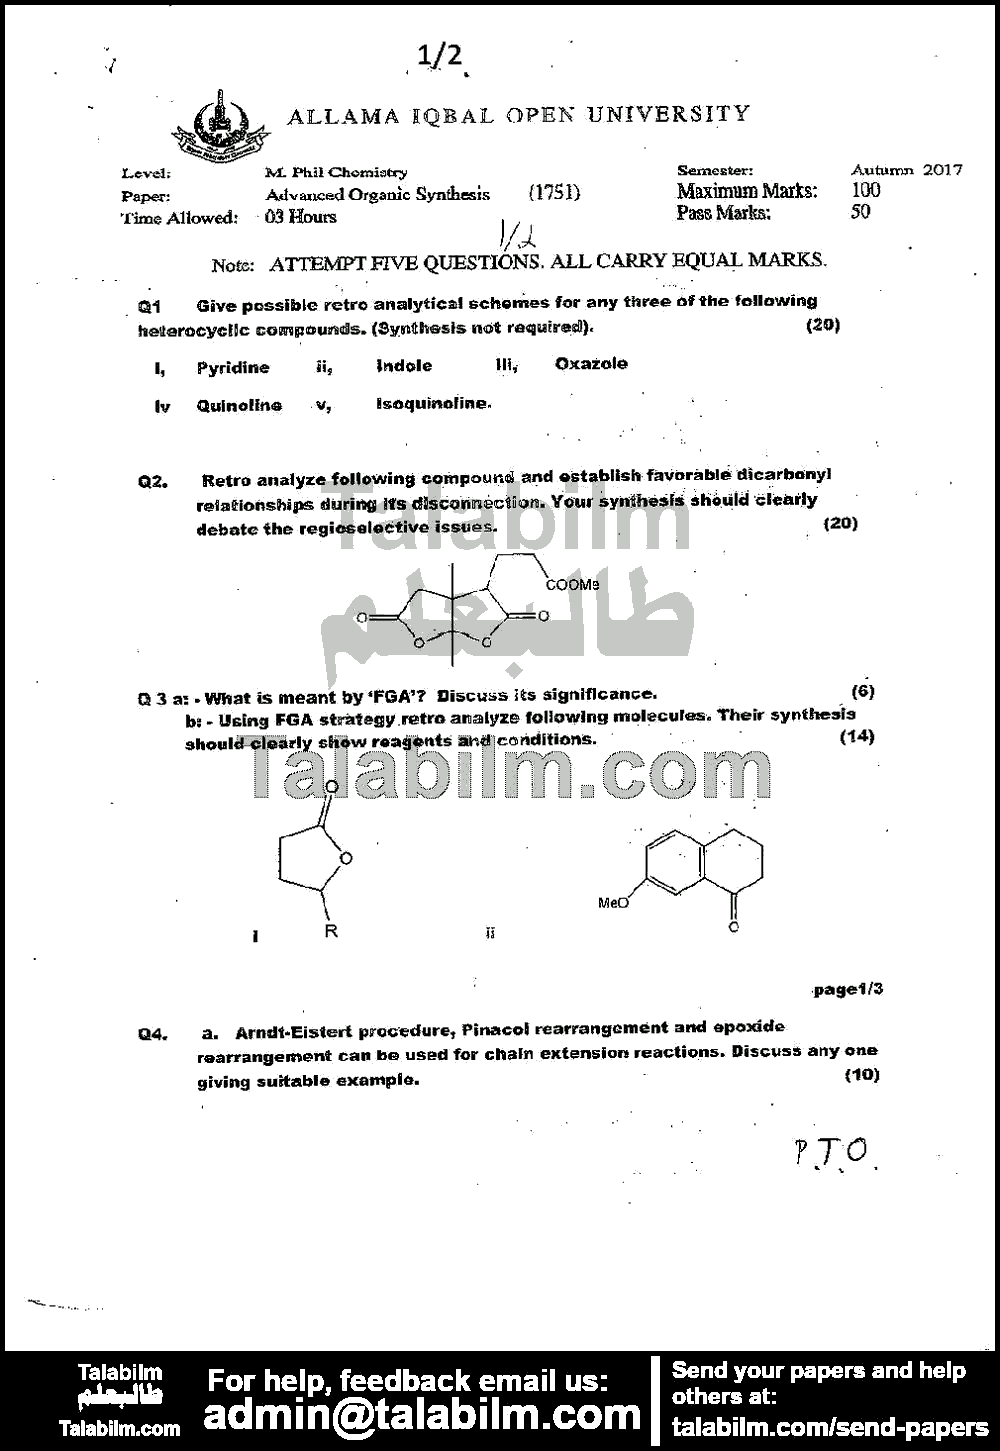 Advanced Organic Synthesis 1751 past paper for Autumn 2017